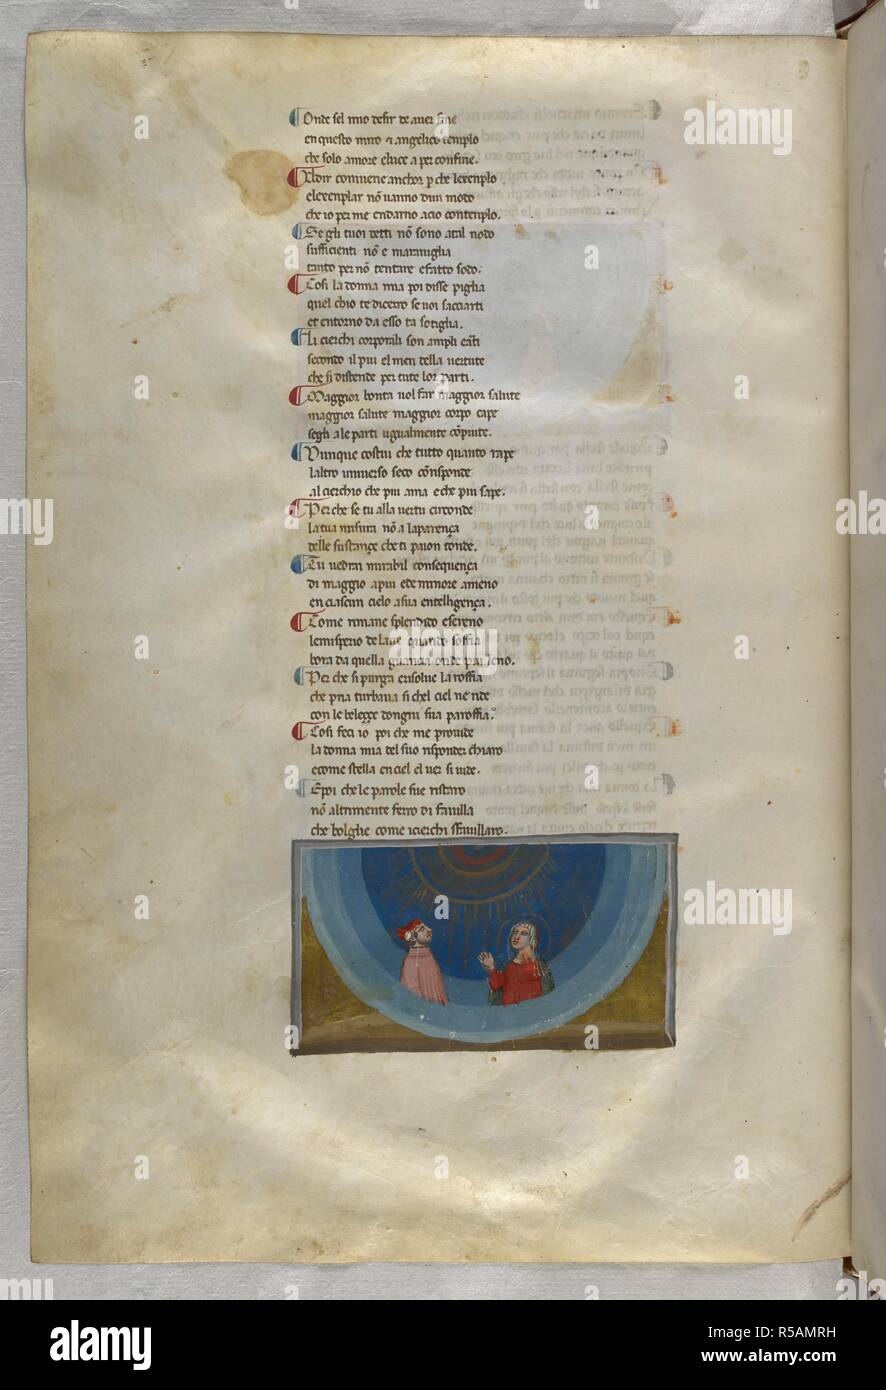 Paradiso : Beatrice explains the order to Dante. Dante Alighieri, Divina Commedia ( The Divine Comedy ), with a commentary in Latin. 1st half of the 14th century. Source: Egerton 943, f.176v. Language: Italian, Latin. Stock Photo